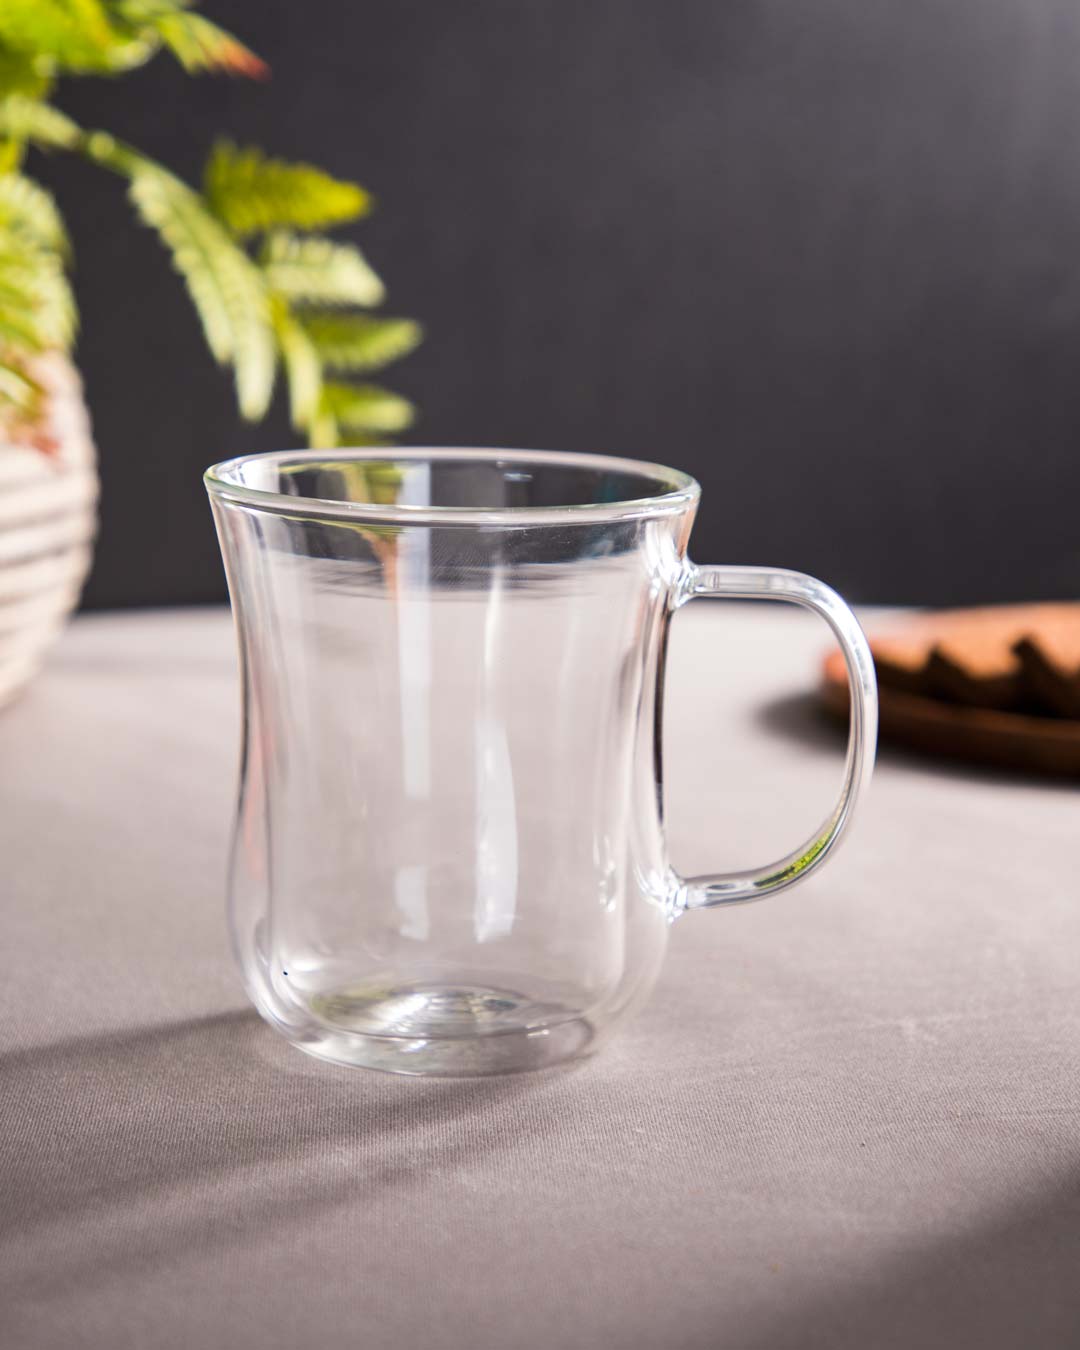 Clear thermal double-walled glass tea cup on a table with a fern in the background.